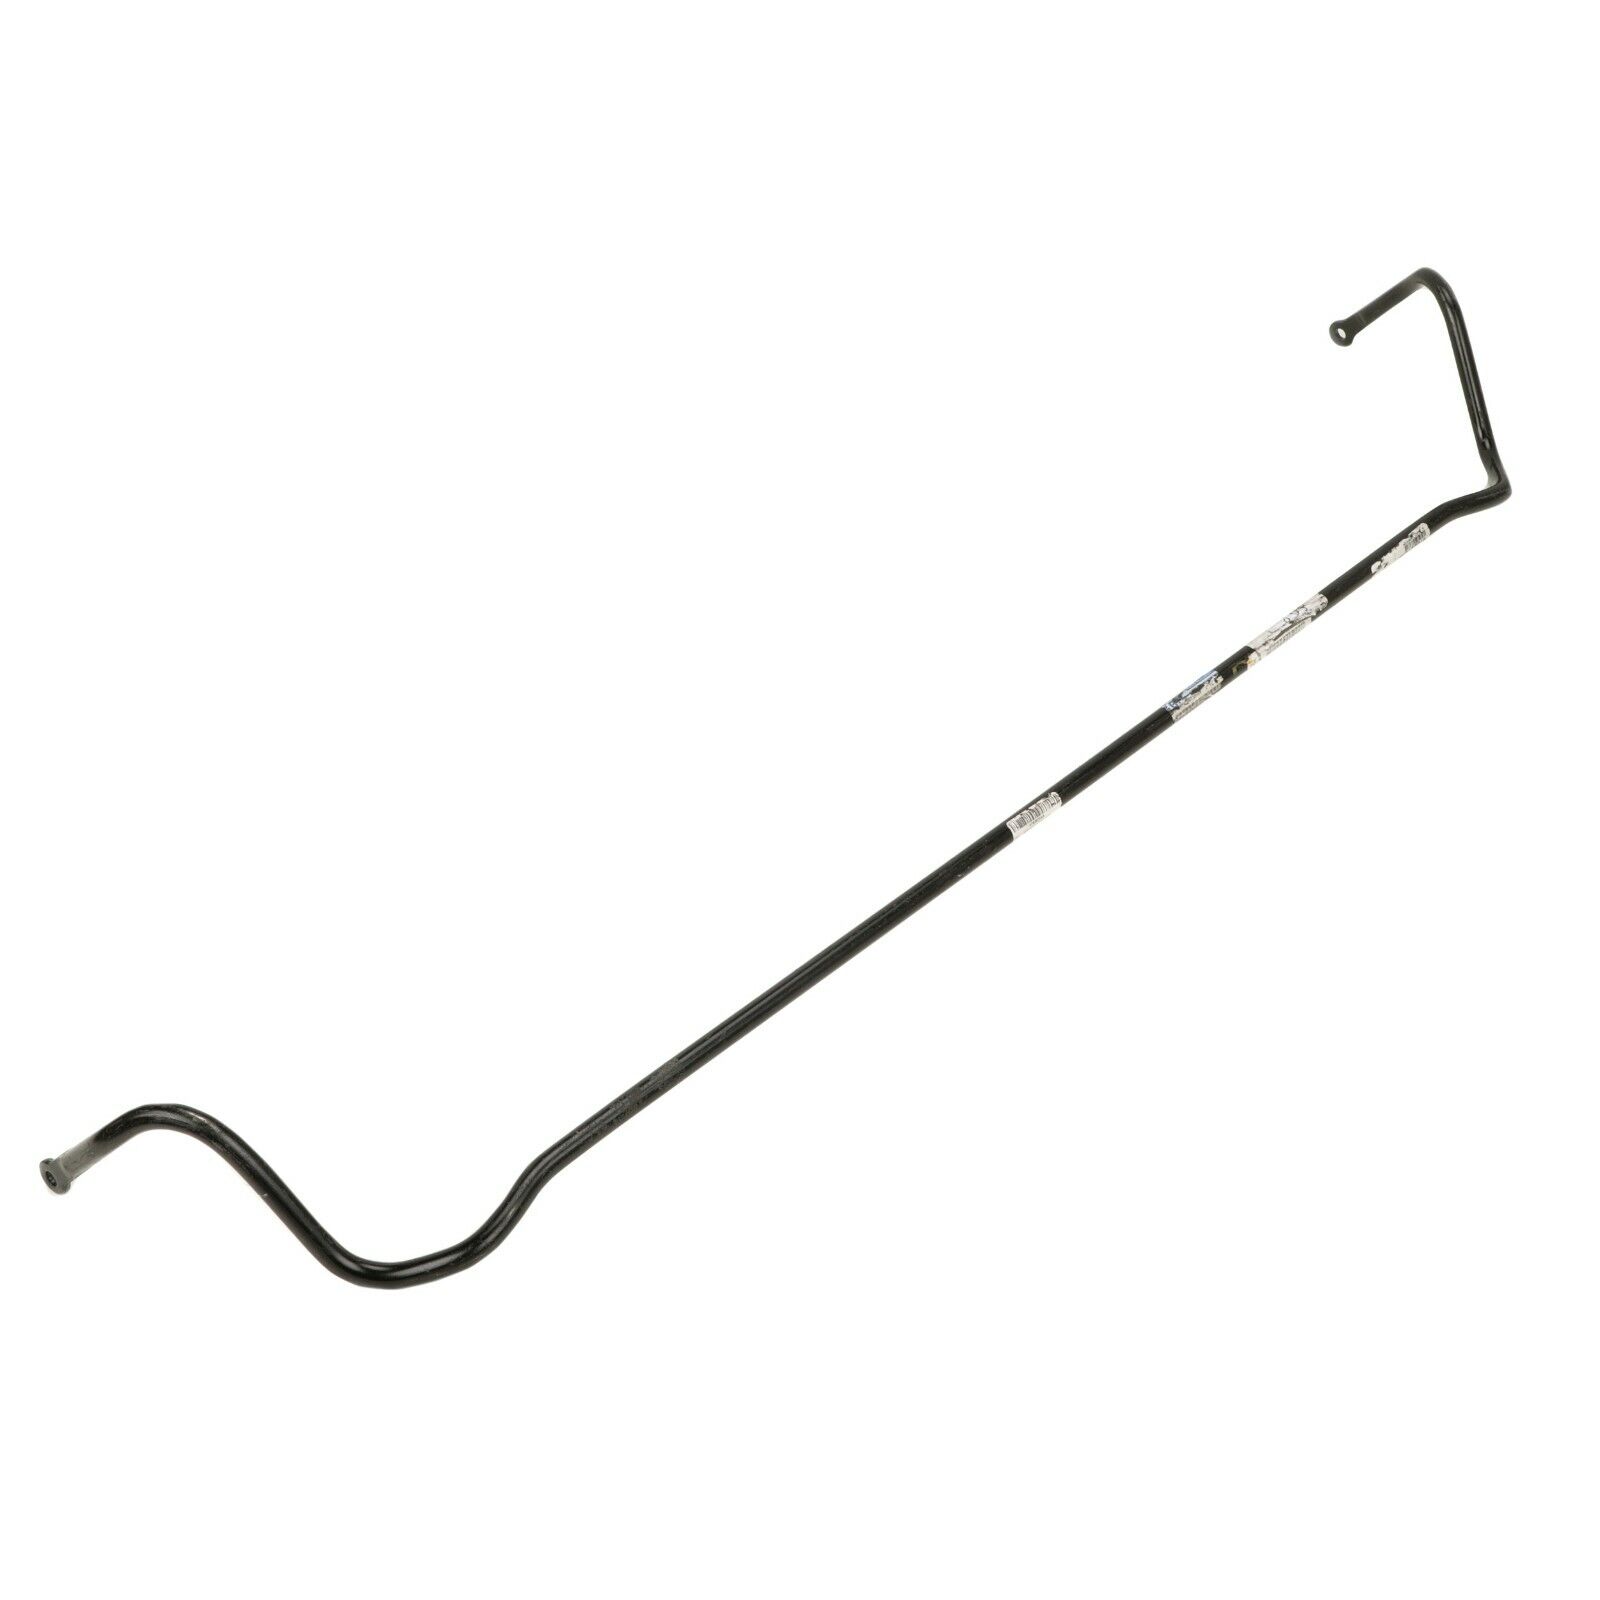 Mopar Replacement Rear Sway Bar 05-14 Challenger, LX Cars RWD